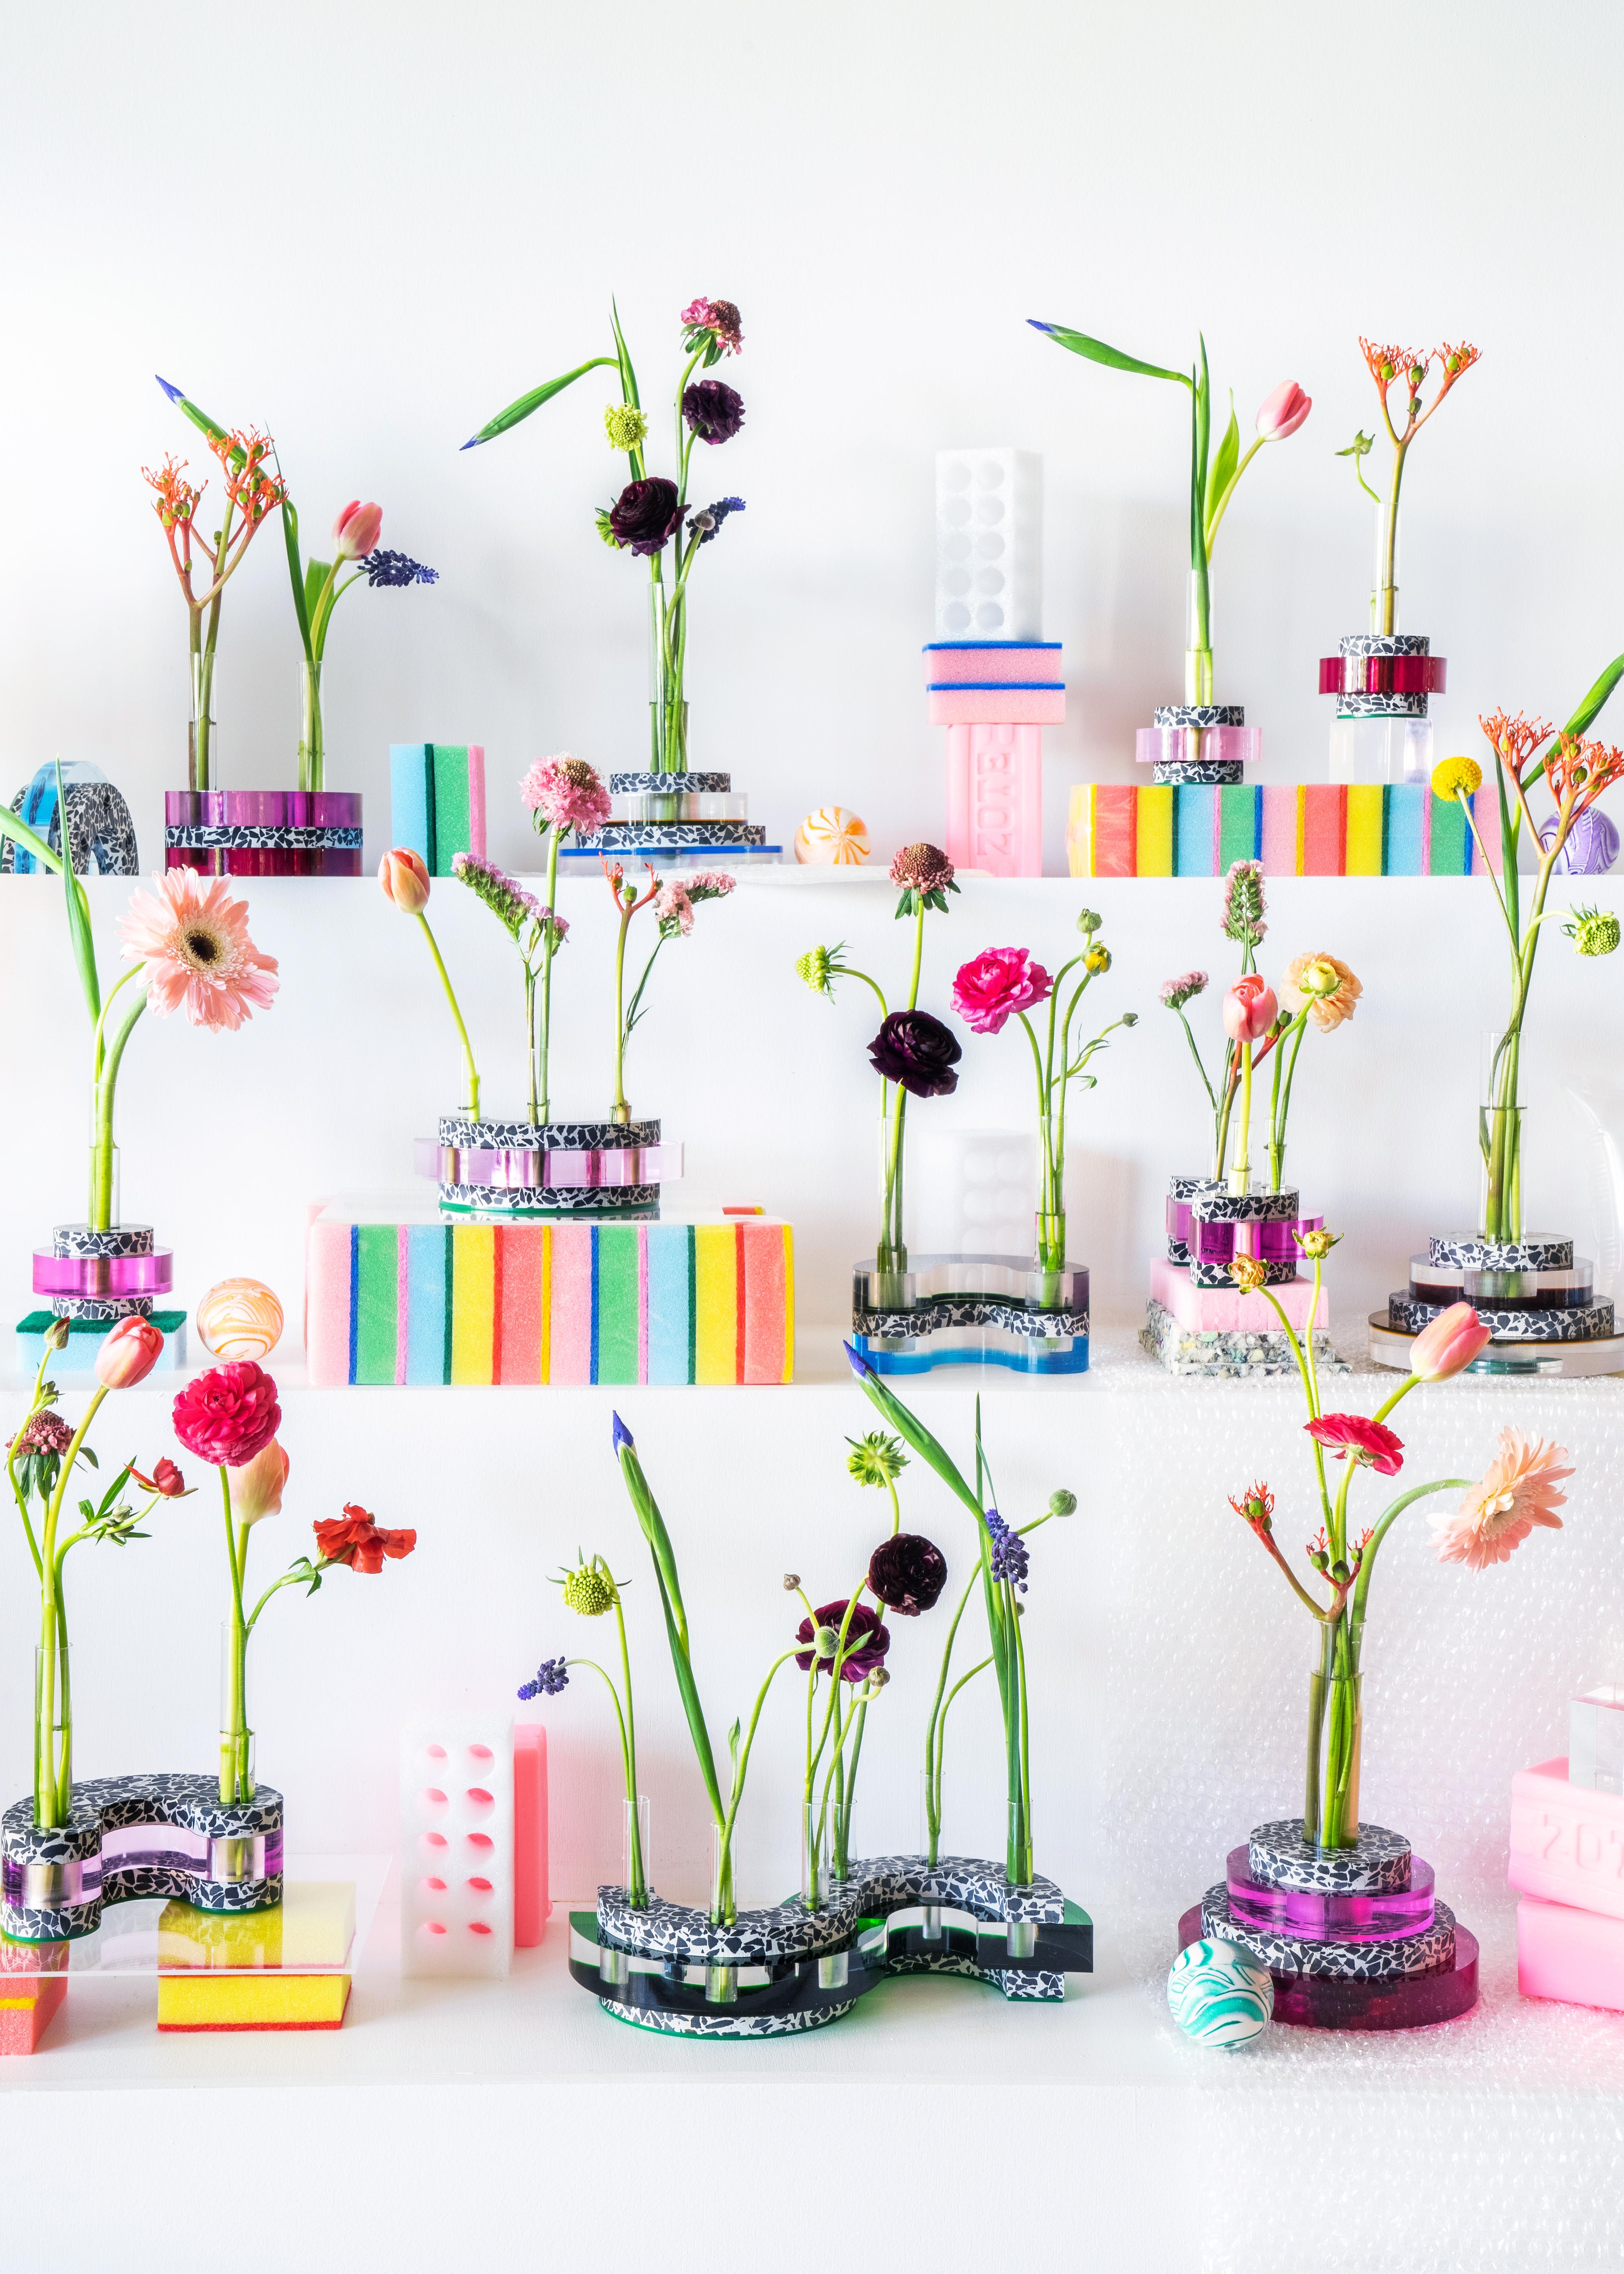 Gabriela has partnered with founder and curator Sara Darling of Rose Cololured to launch the floral shop’s inaugural artist series with Memphis, a show consisting of mini-sculptures inspired by postmodern Memphis Design and Miami’s Art Deco era. The